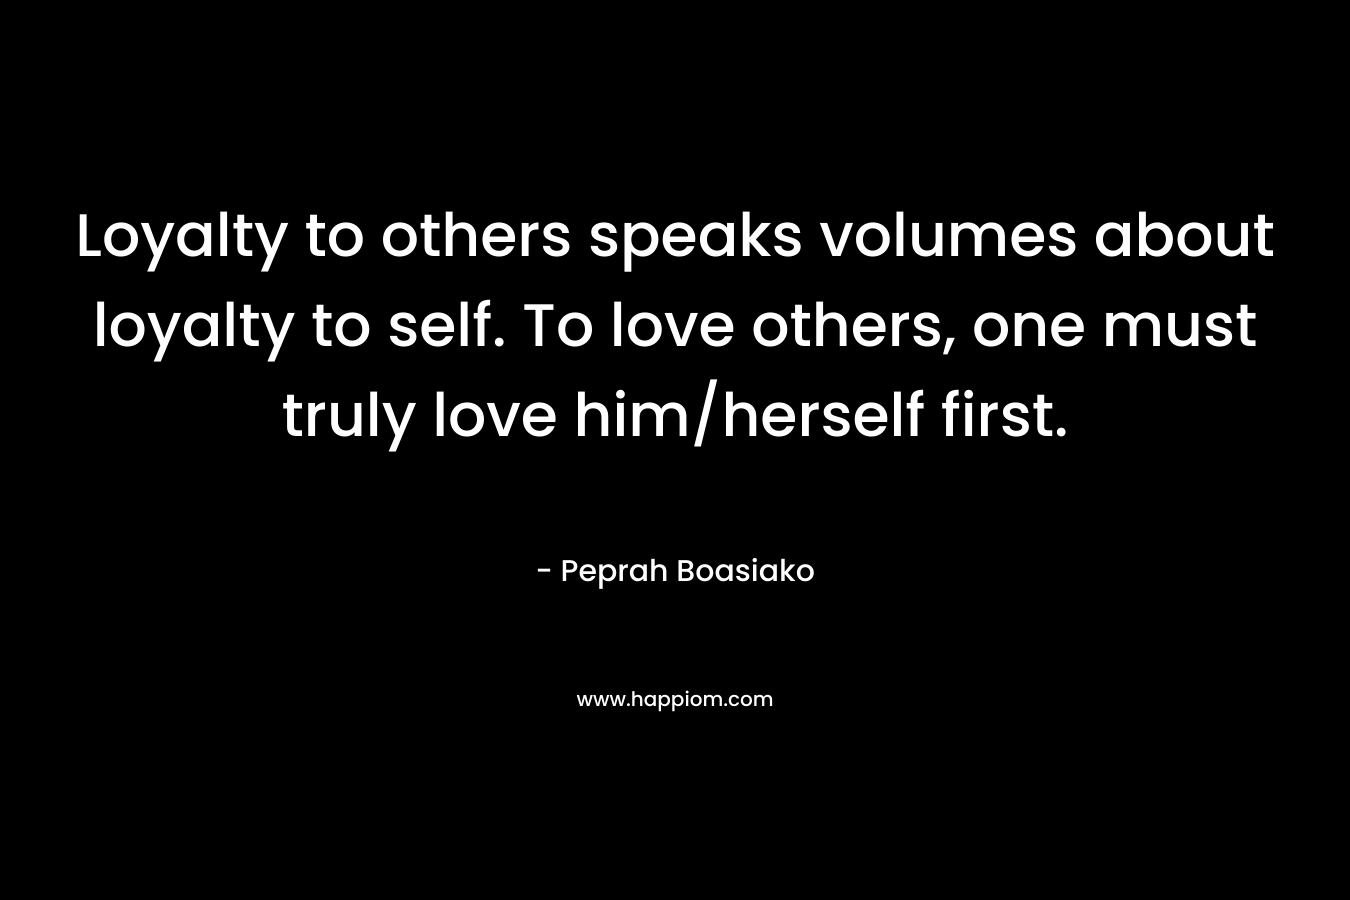 Loyalty to others speaks volumes about loyalty to self. To love others, one must truly love him/herself first.